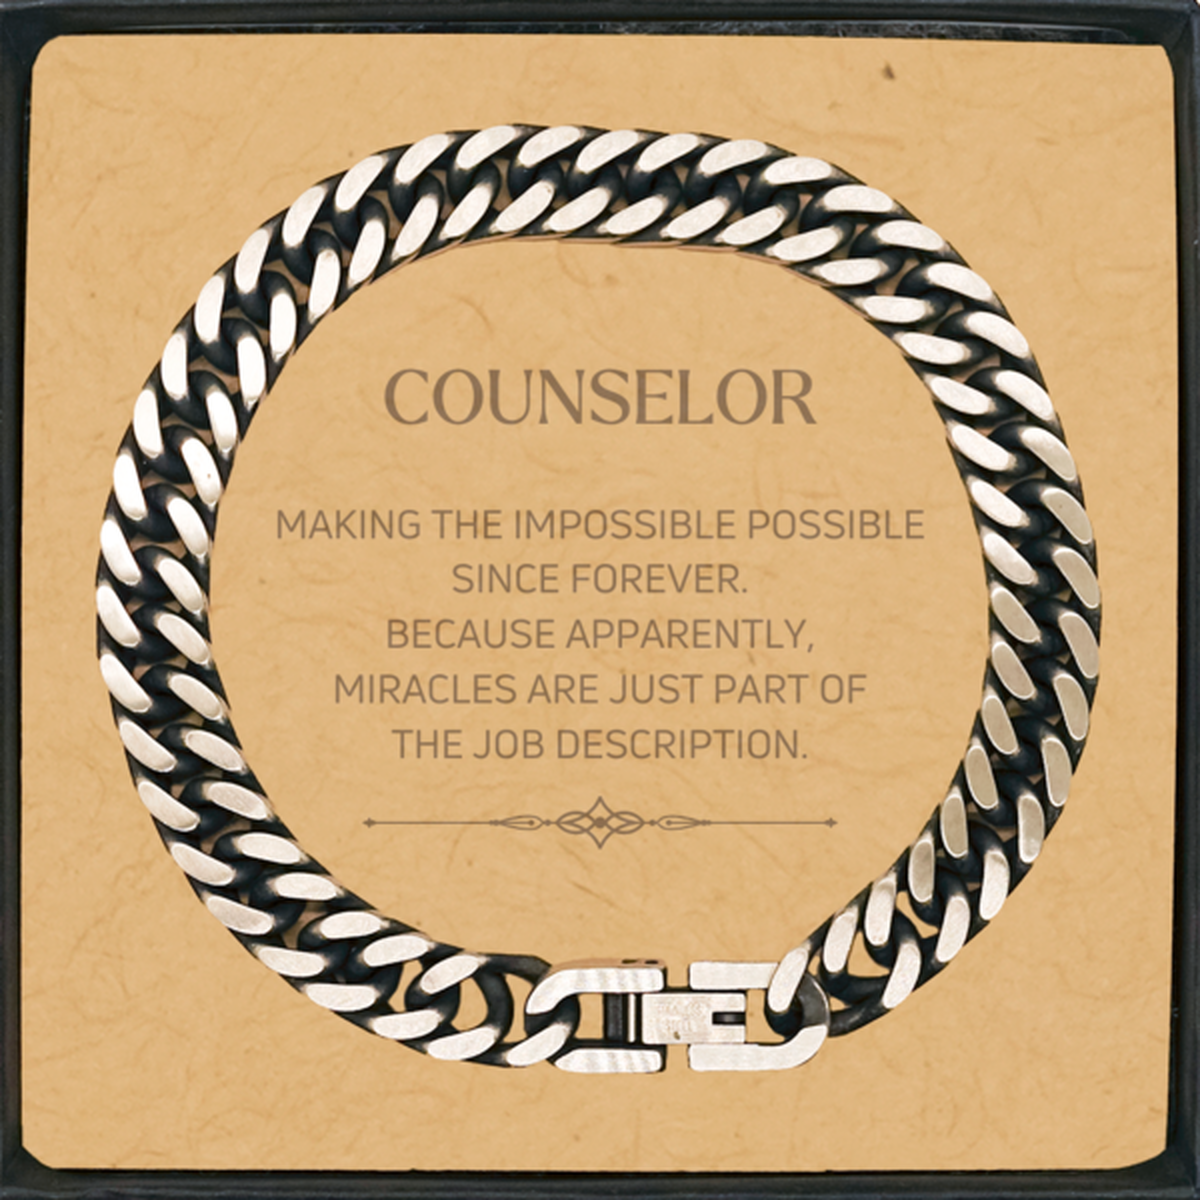 Funny Counselor Gifts, Miracles are just part of the job description, Inspirational Birthday Cuban Link Chain Bracelet For Counselor, Men, Women, Coworkers, Friends, Boss